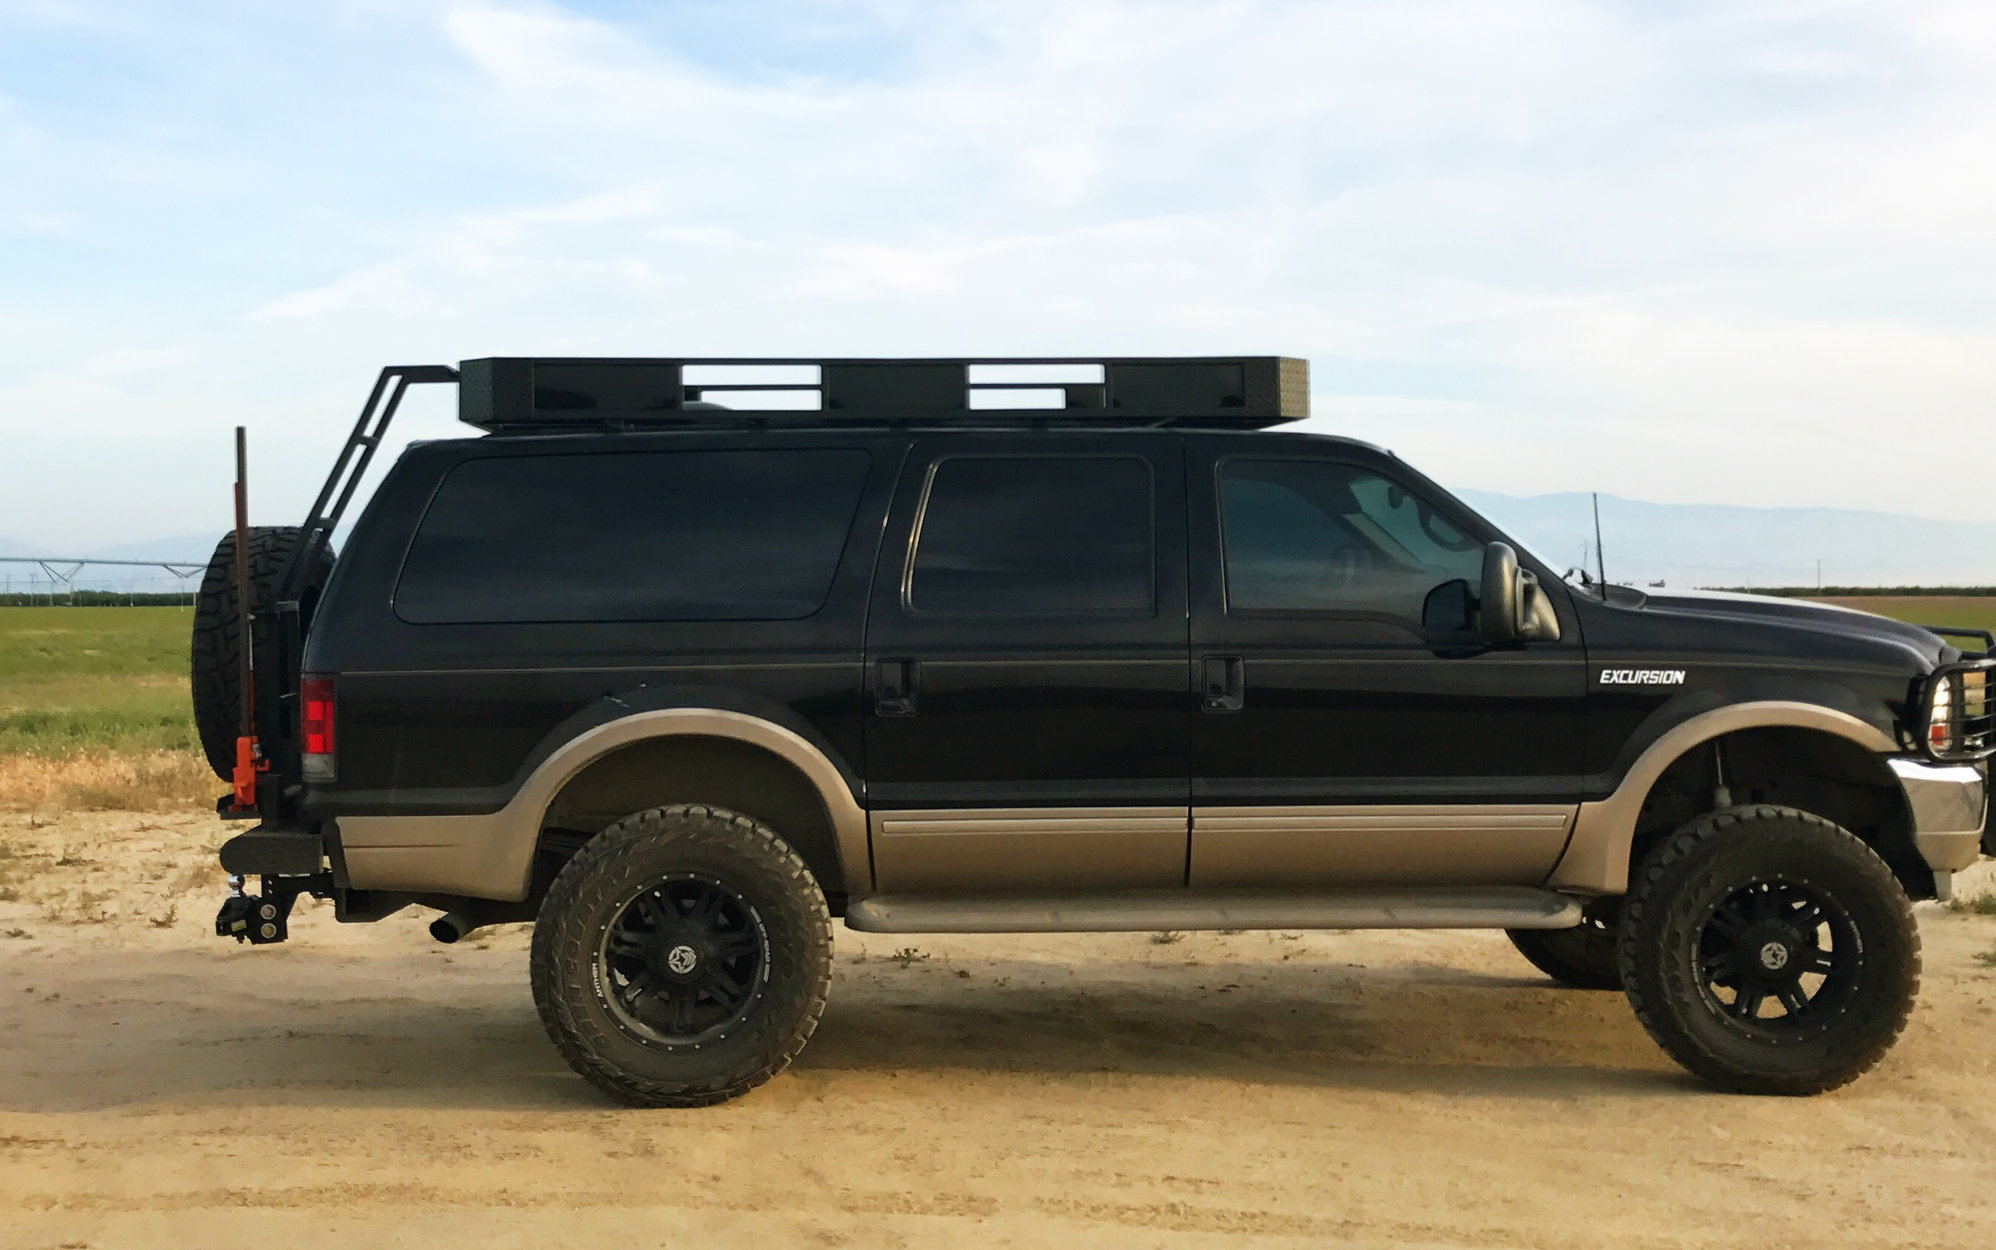 2002 Ford Excursion - 2002 Ford Excursion Diesel 4x4 /w 7.3 and great overland build offroad - Used - VIN 1FMSU43F92EB65812 - 300,000 Miles - 8 cyl - 4WD - Automatic - SUV - Black - Bakersfield, CA 93311, United States